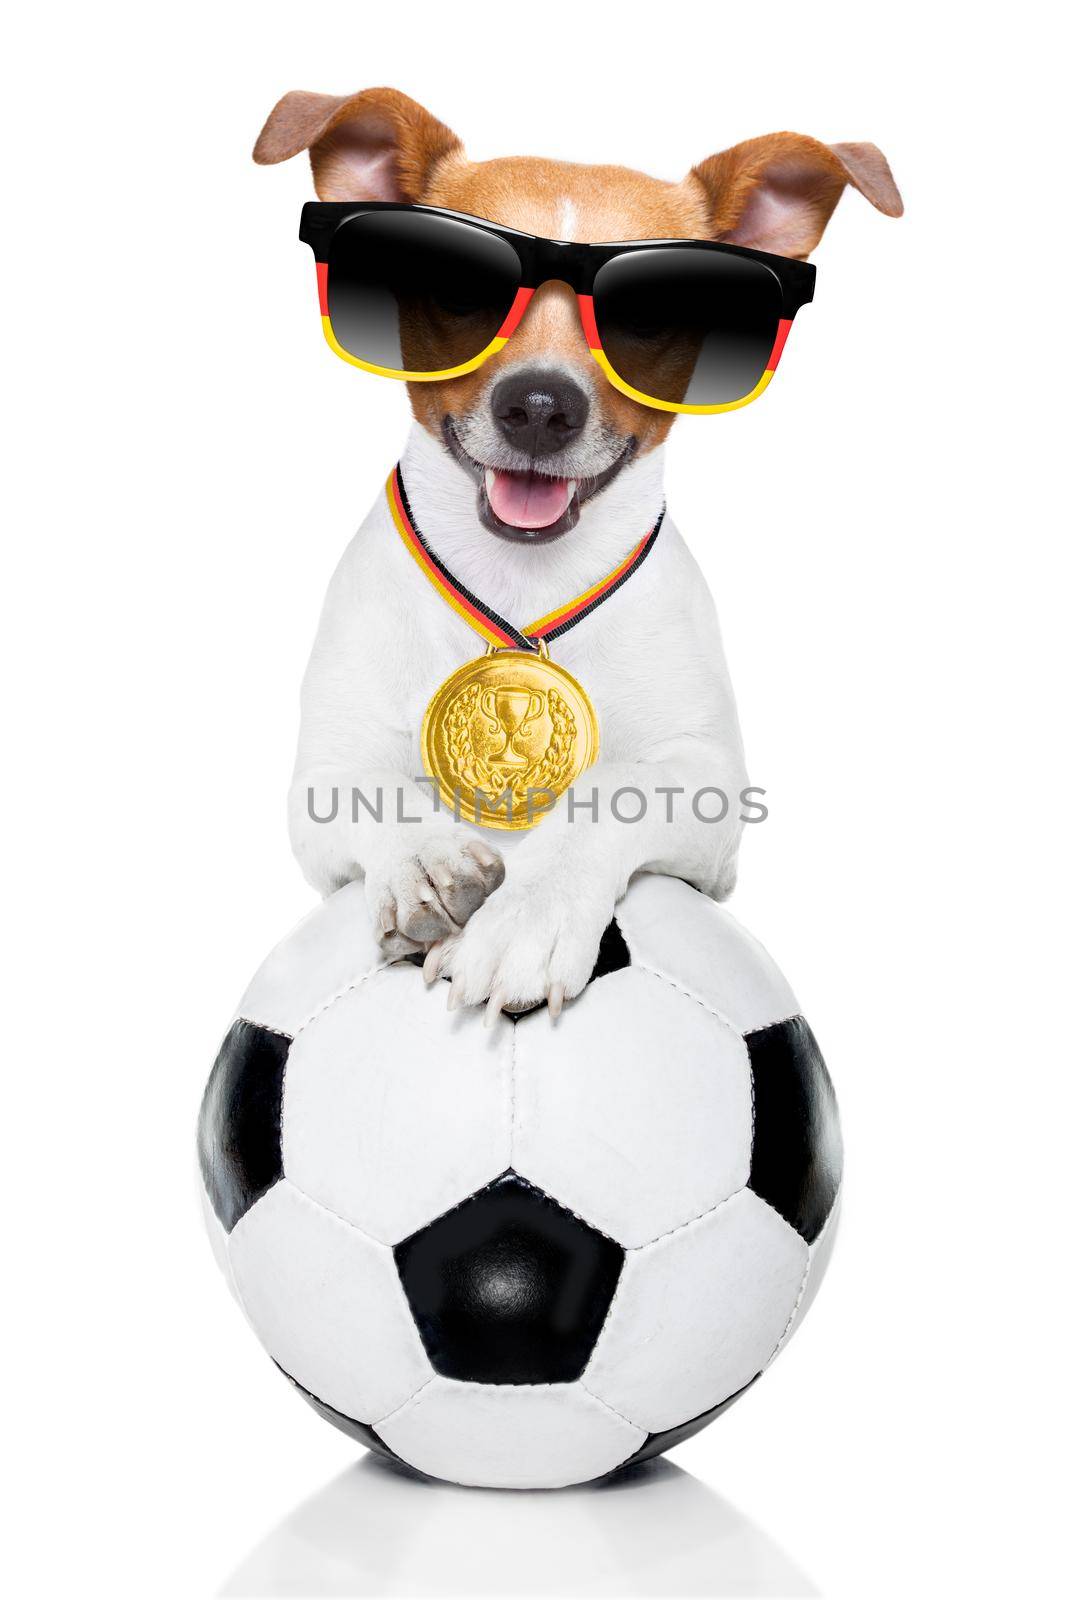 soccer jack russell  dog playing with leather ball  , isolated on white background and german  flag wearing sunglasses